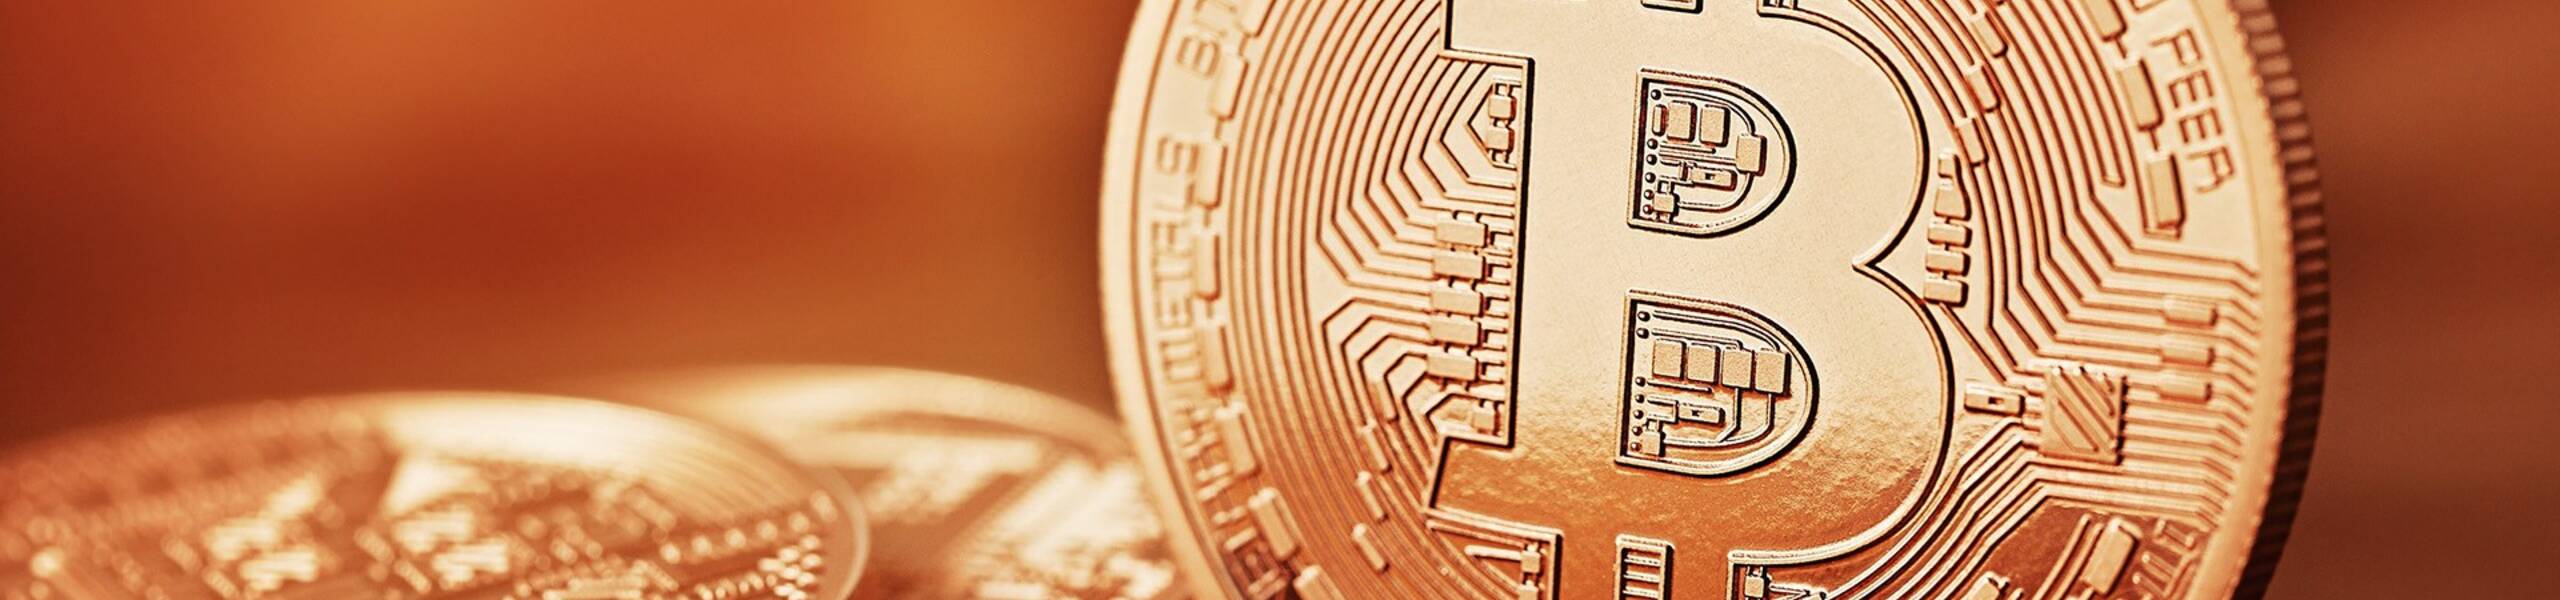 Bitcoin might split in two